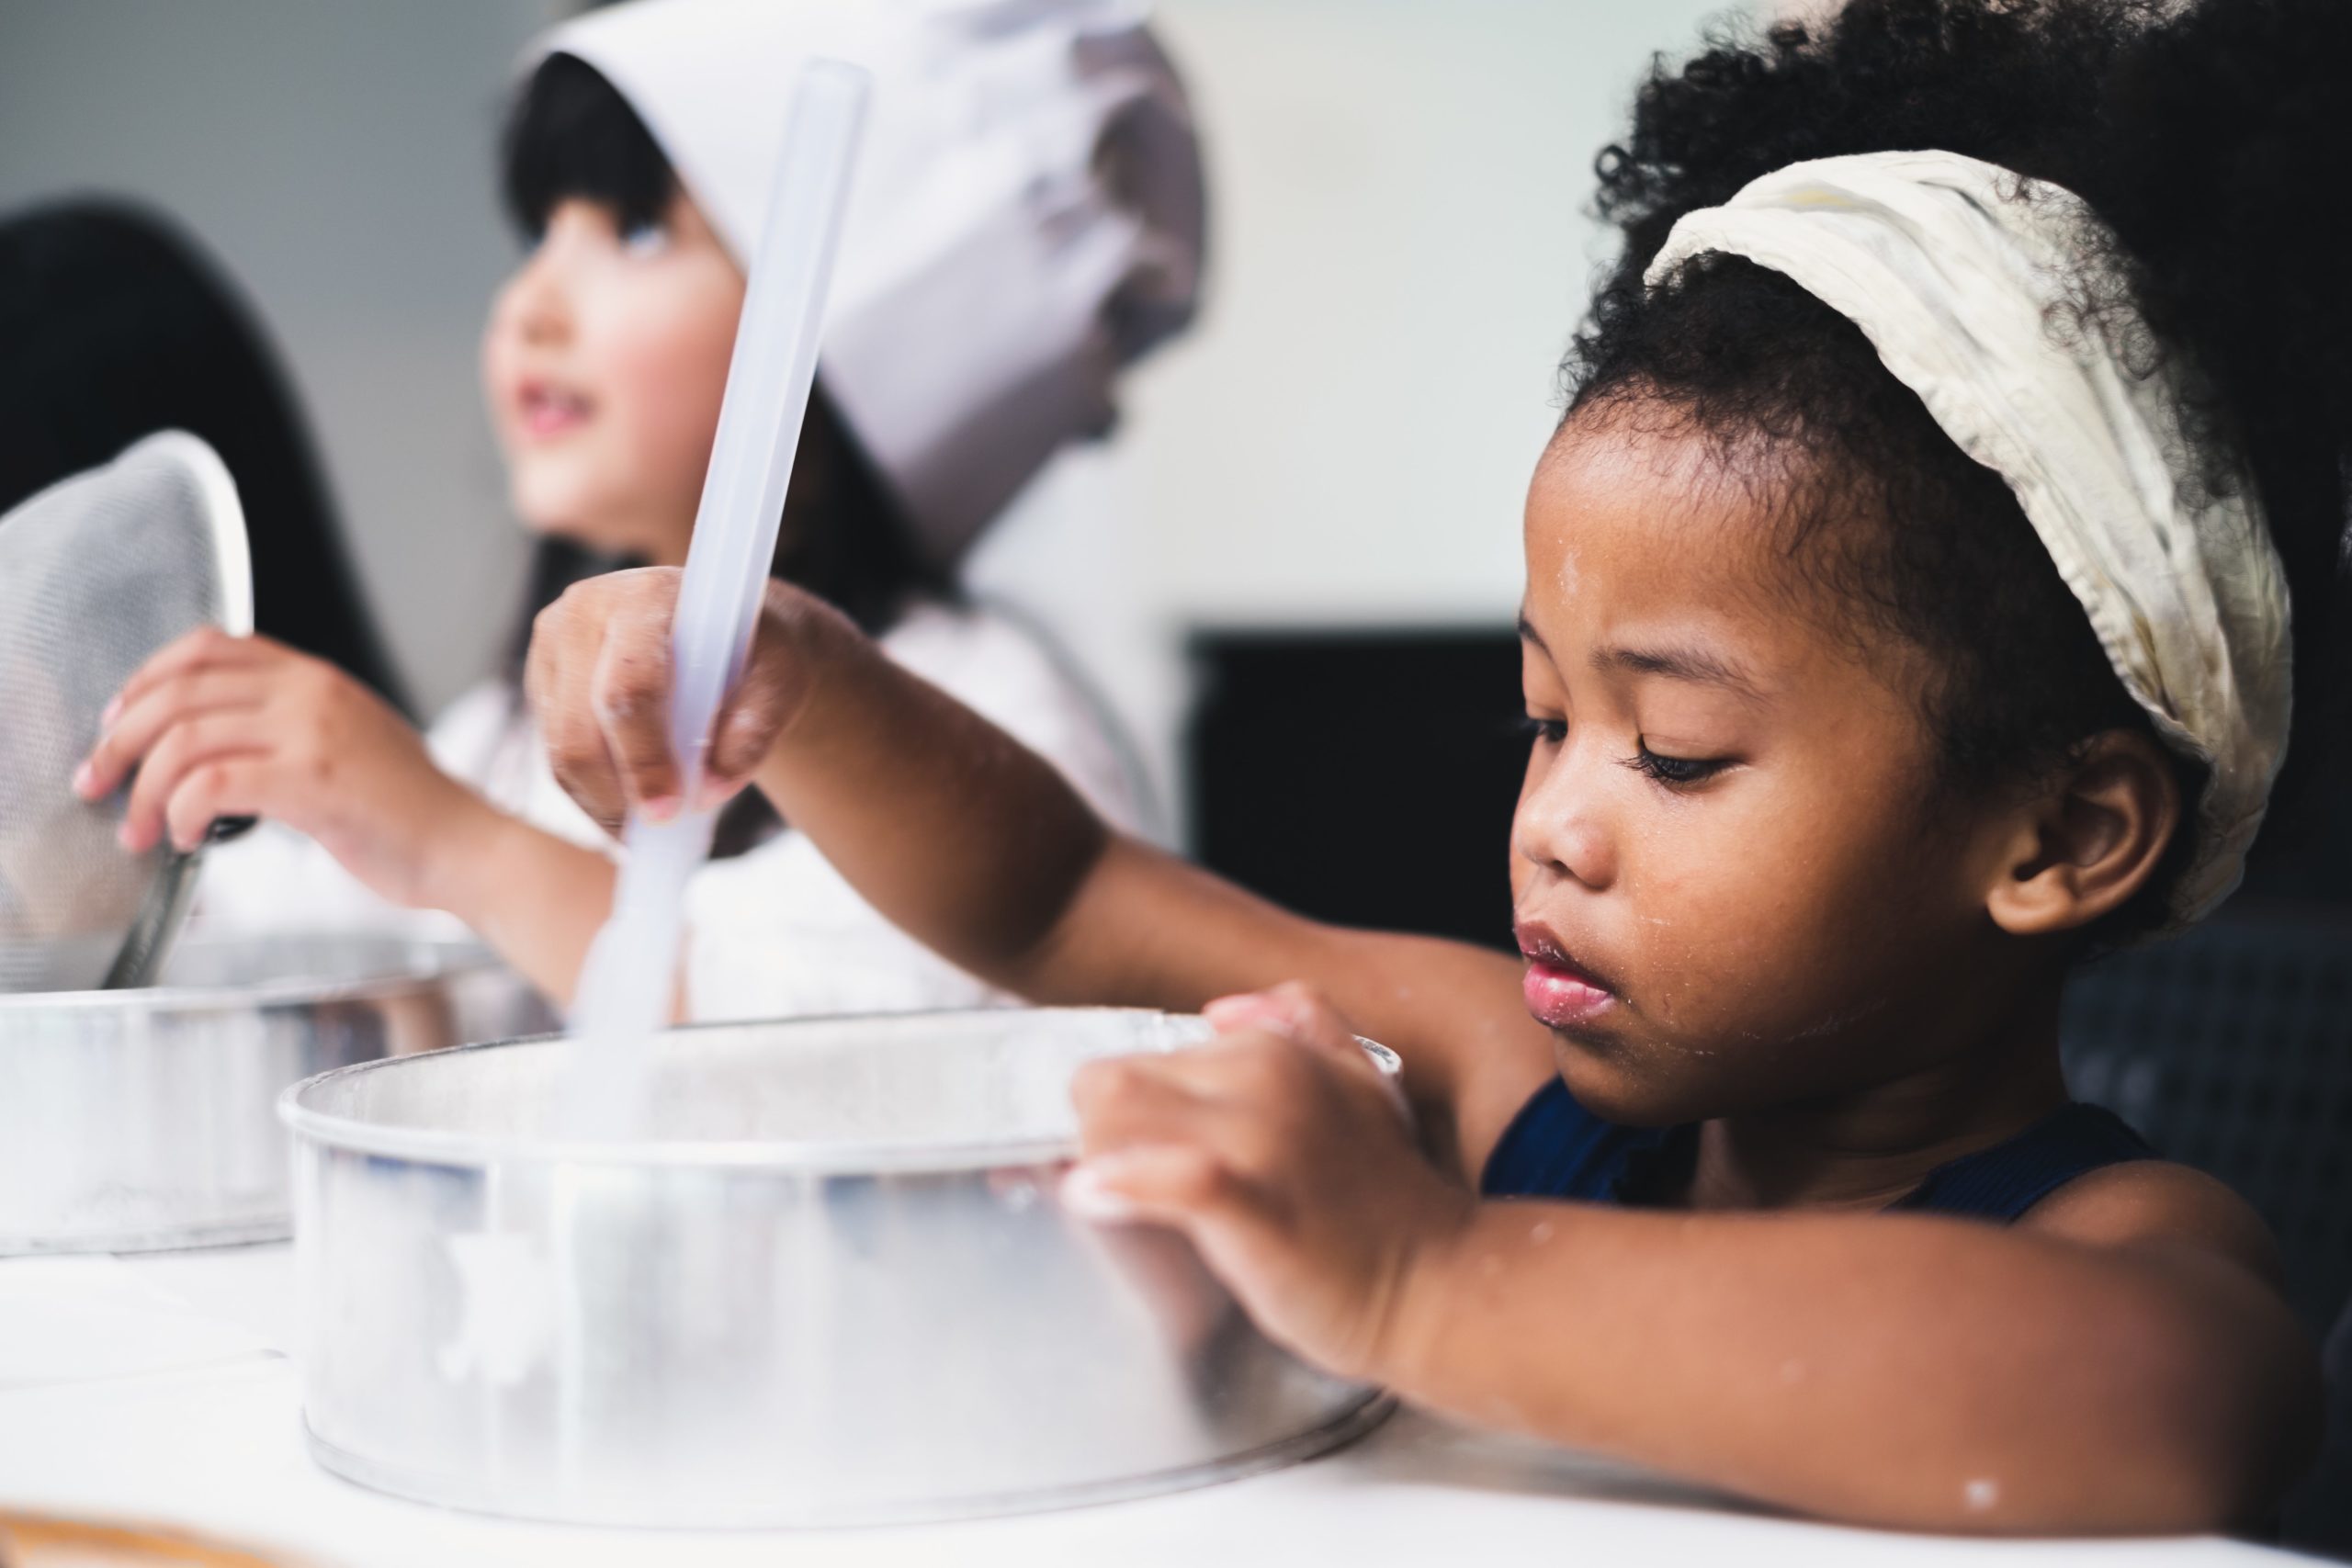 Two children stirring batter in a bowl in cooking class